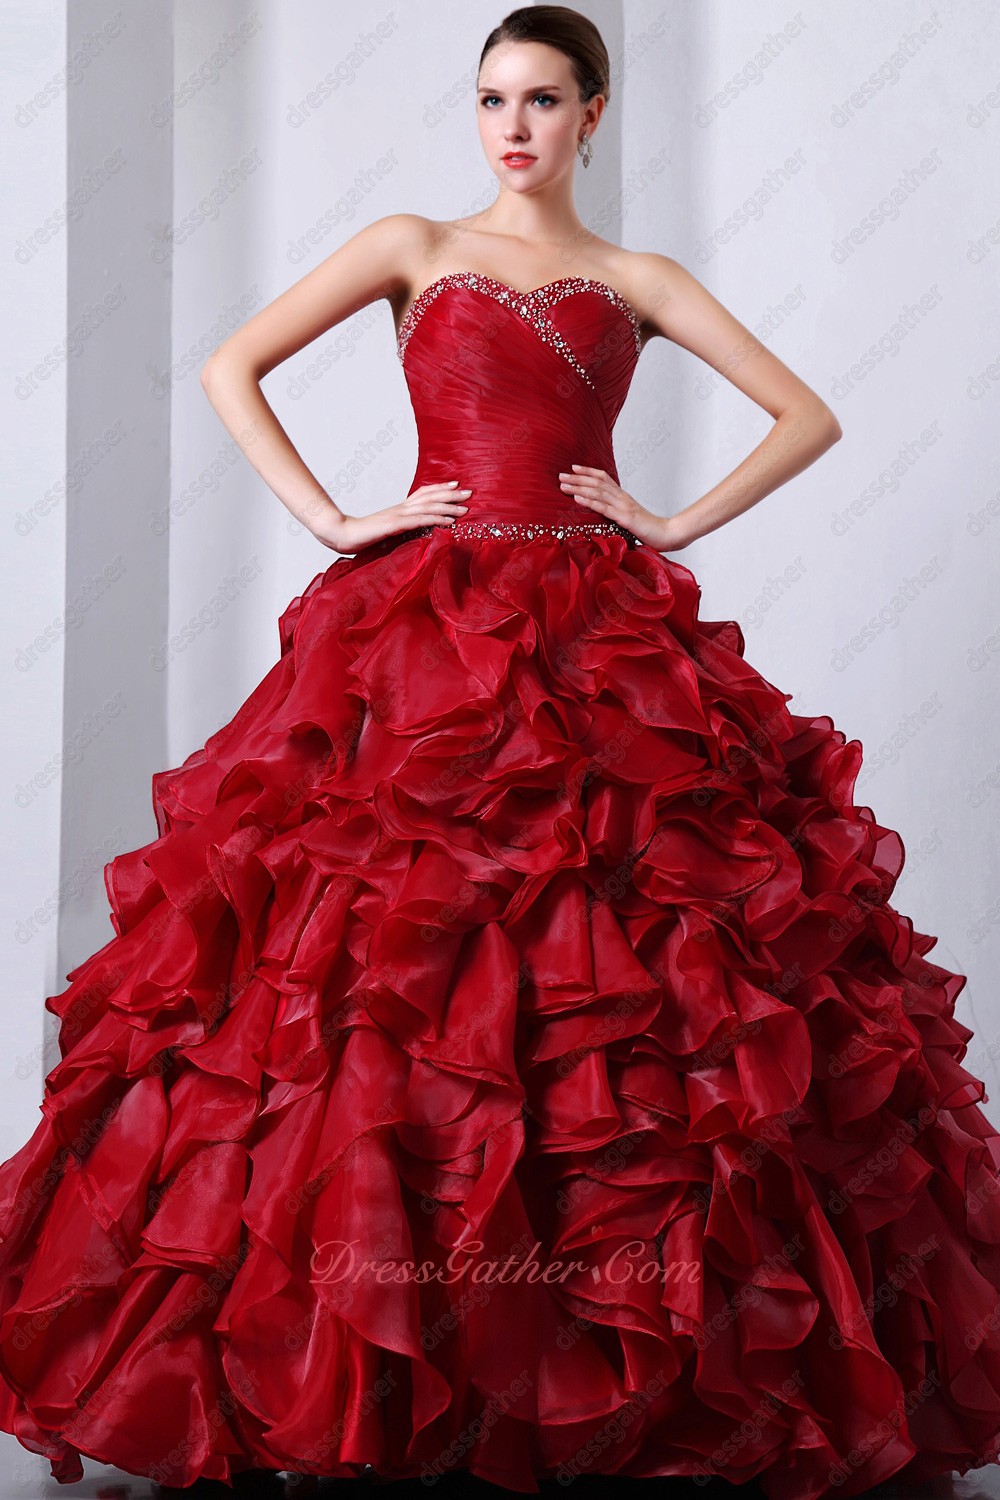 Cascade Ruffle Skirt Wine Red Thick High Quality Organza Puffy Sweet 16 Ball Gown - Click Image to Close